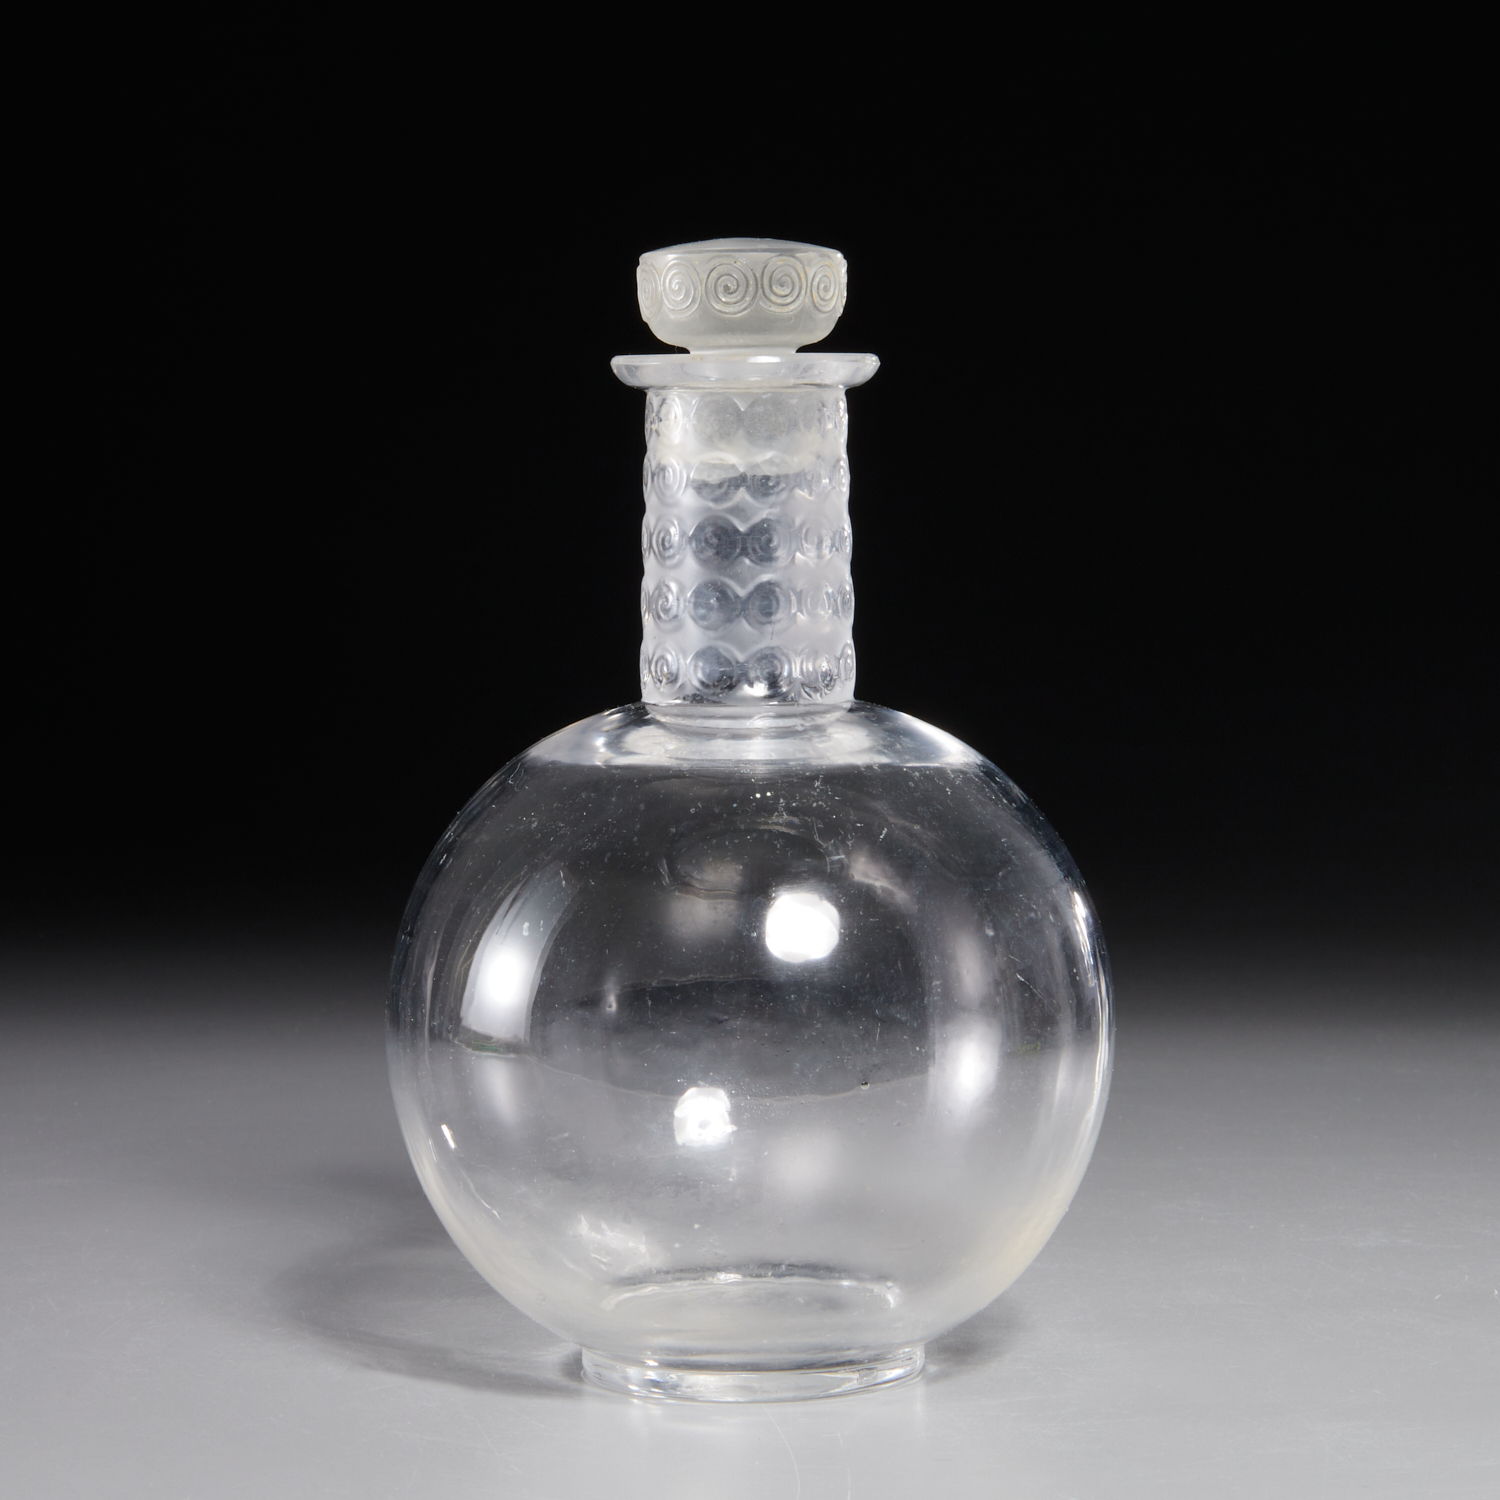 RENE LALIQUE, RARE EARLY DECANTER AND